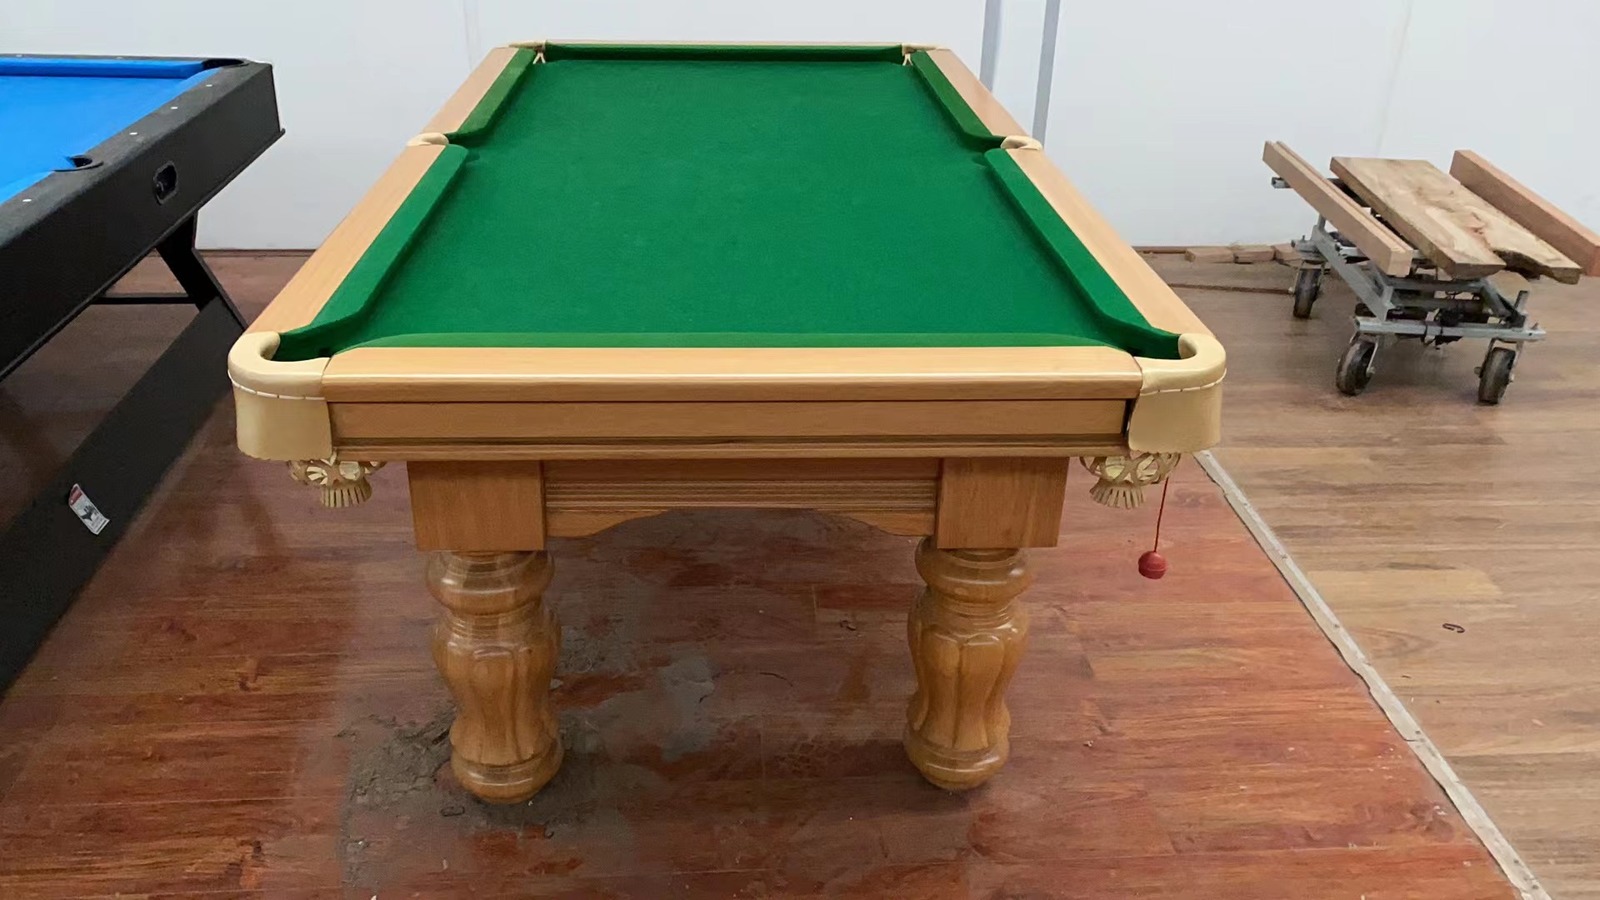 Melbourne Special - 7 Foot Used Pool Table in excellent condition